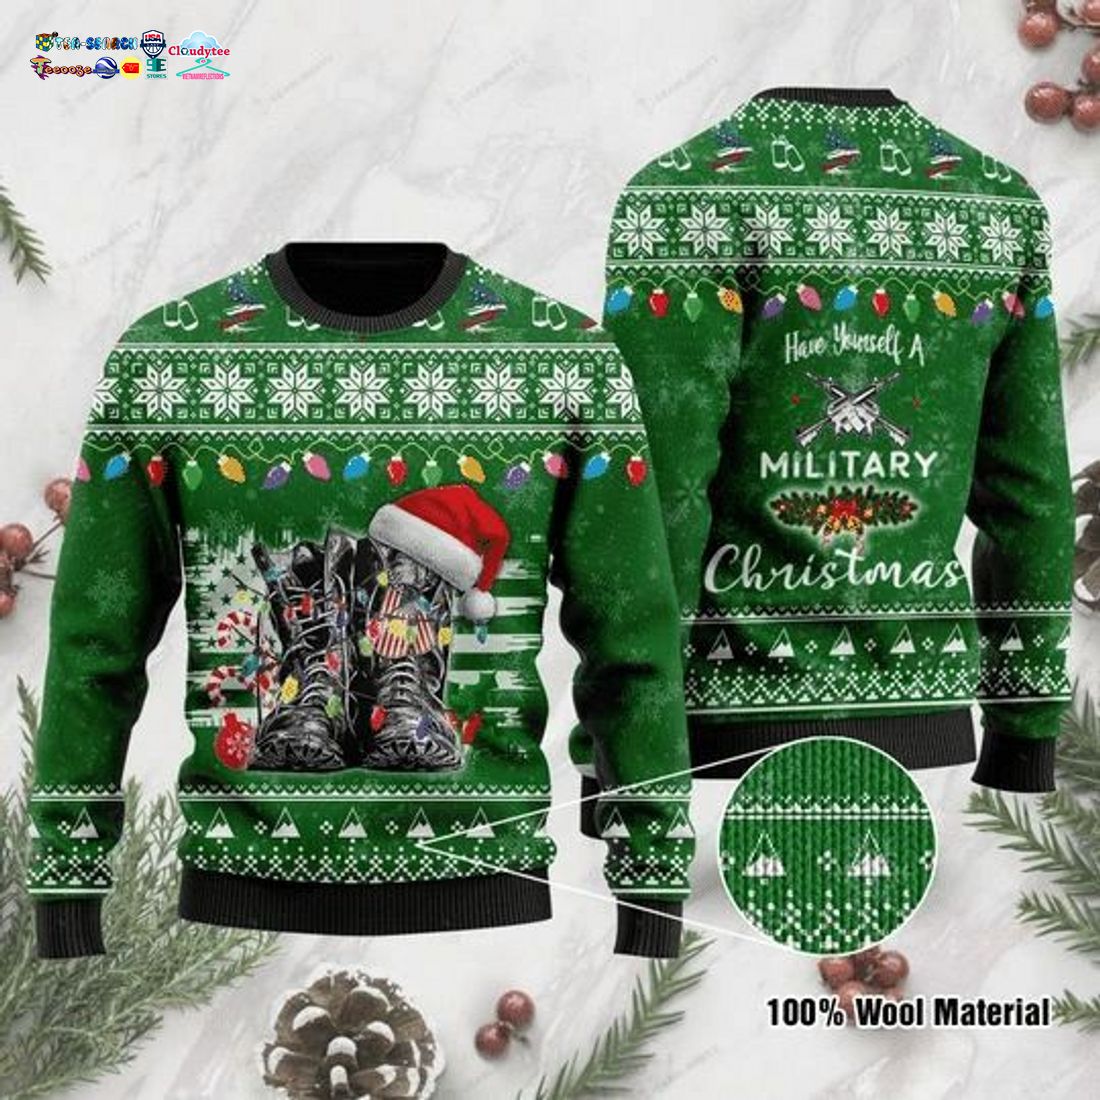 soldier-shoes-have-yourself-a-military-ugly-christmas-sweater-1-ODkiw.jpg